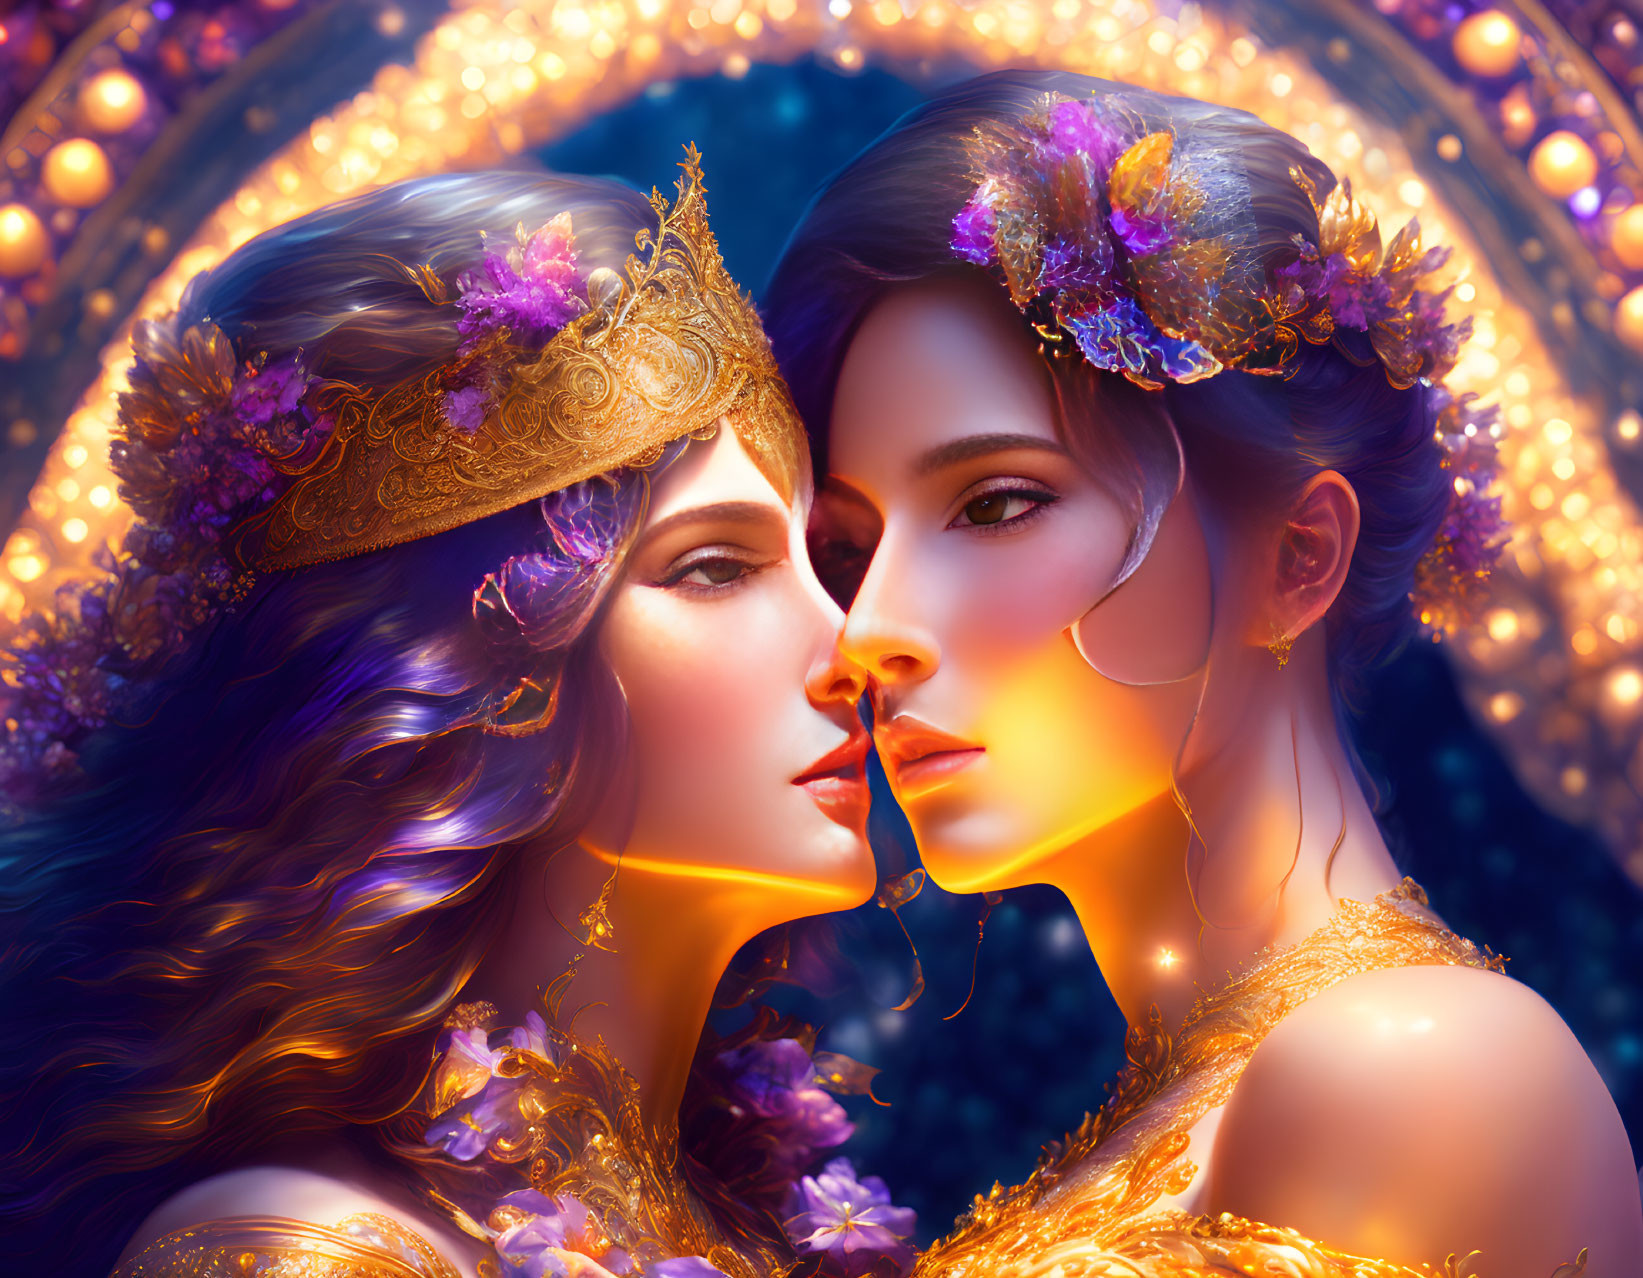 Two women in golden headpieces and purple flowers against cosmic backdrop